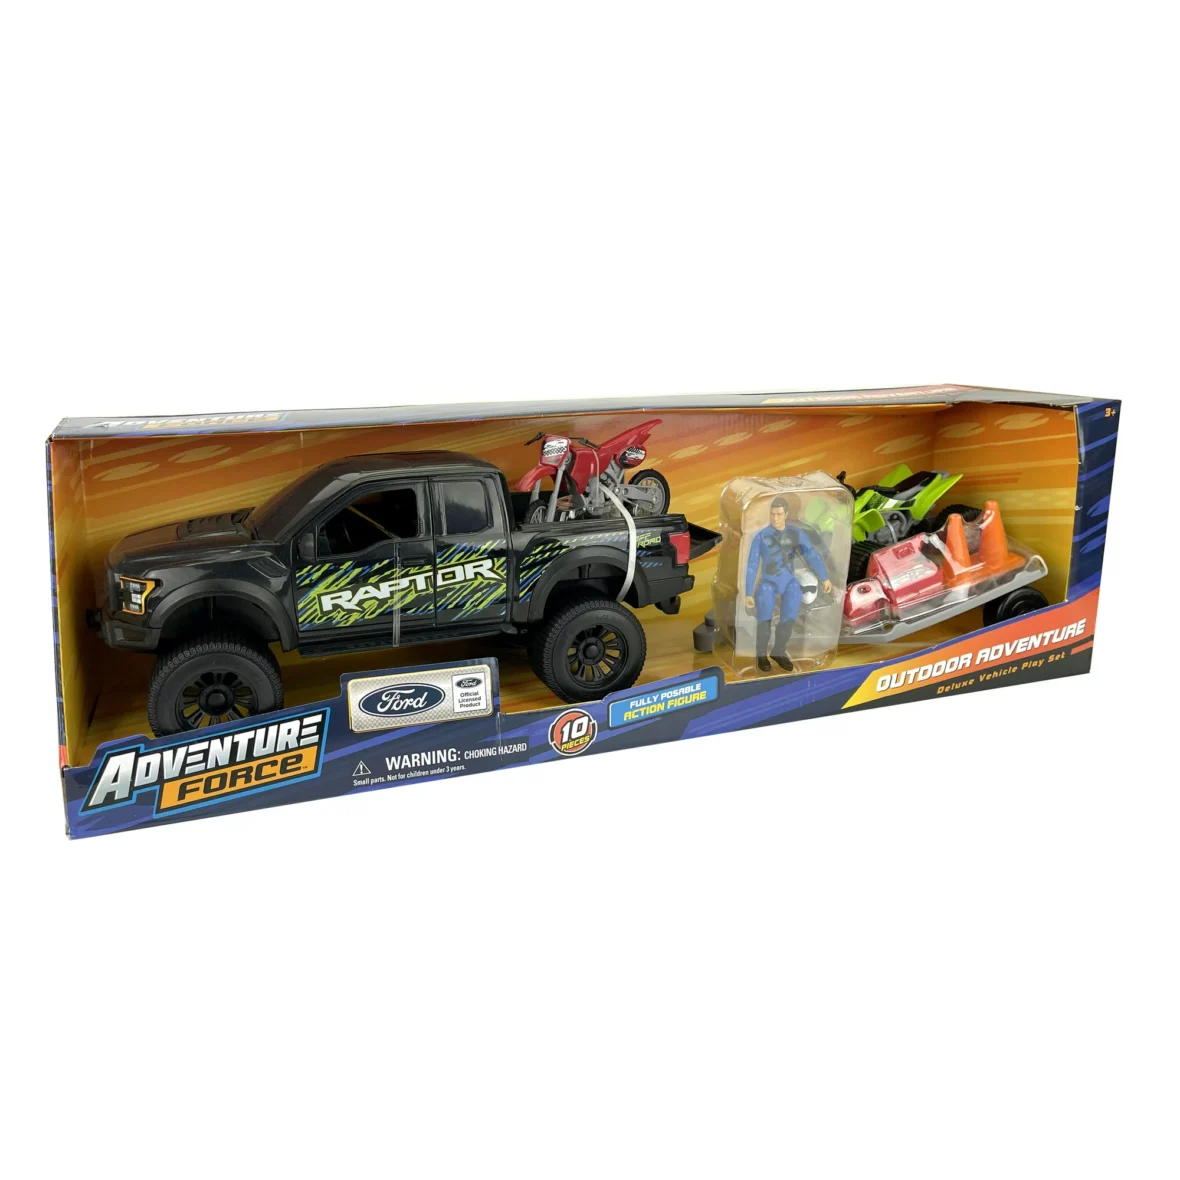 Adventure Force Outdoor Adventure Deluxe Vehicle Play Set (Styles May Vary)